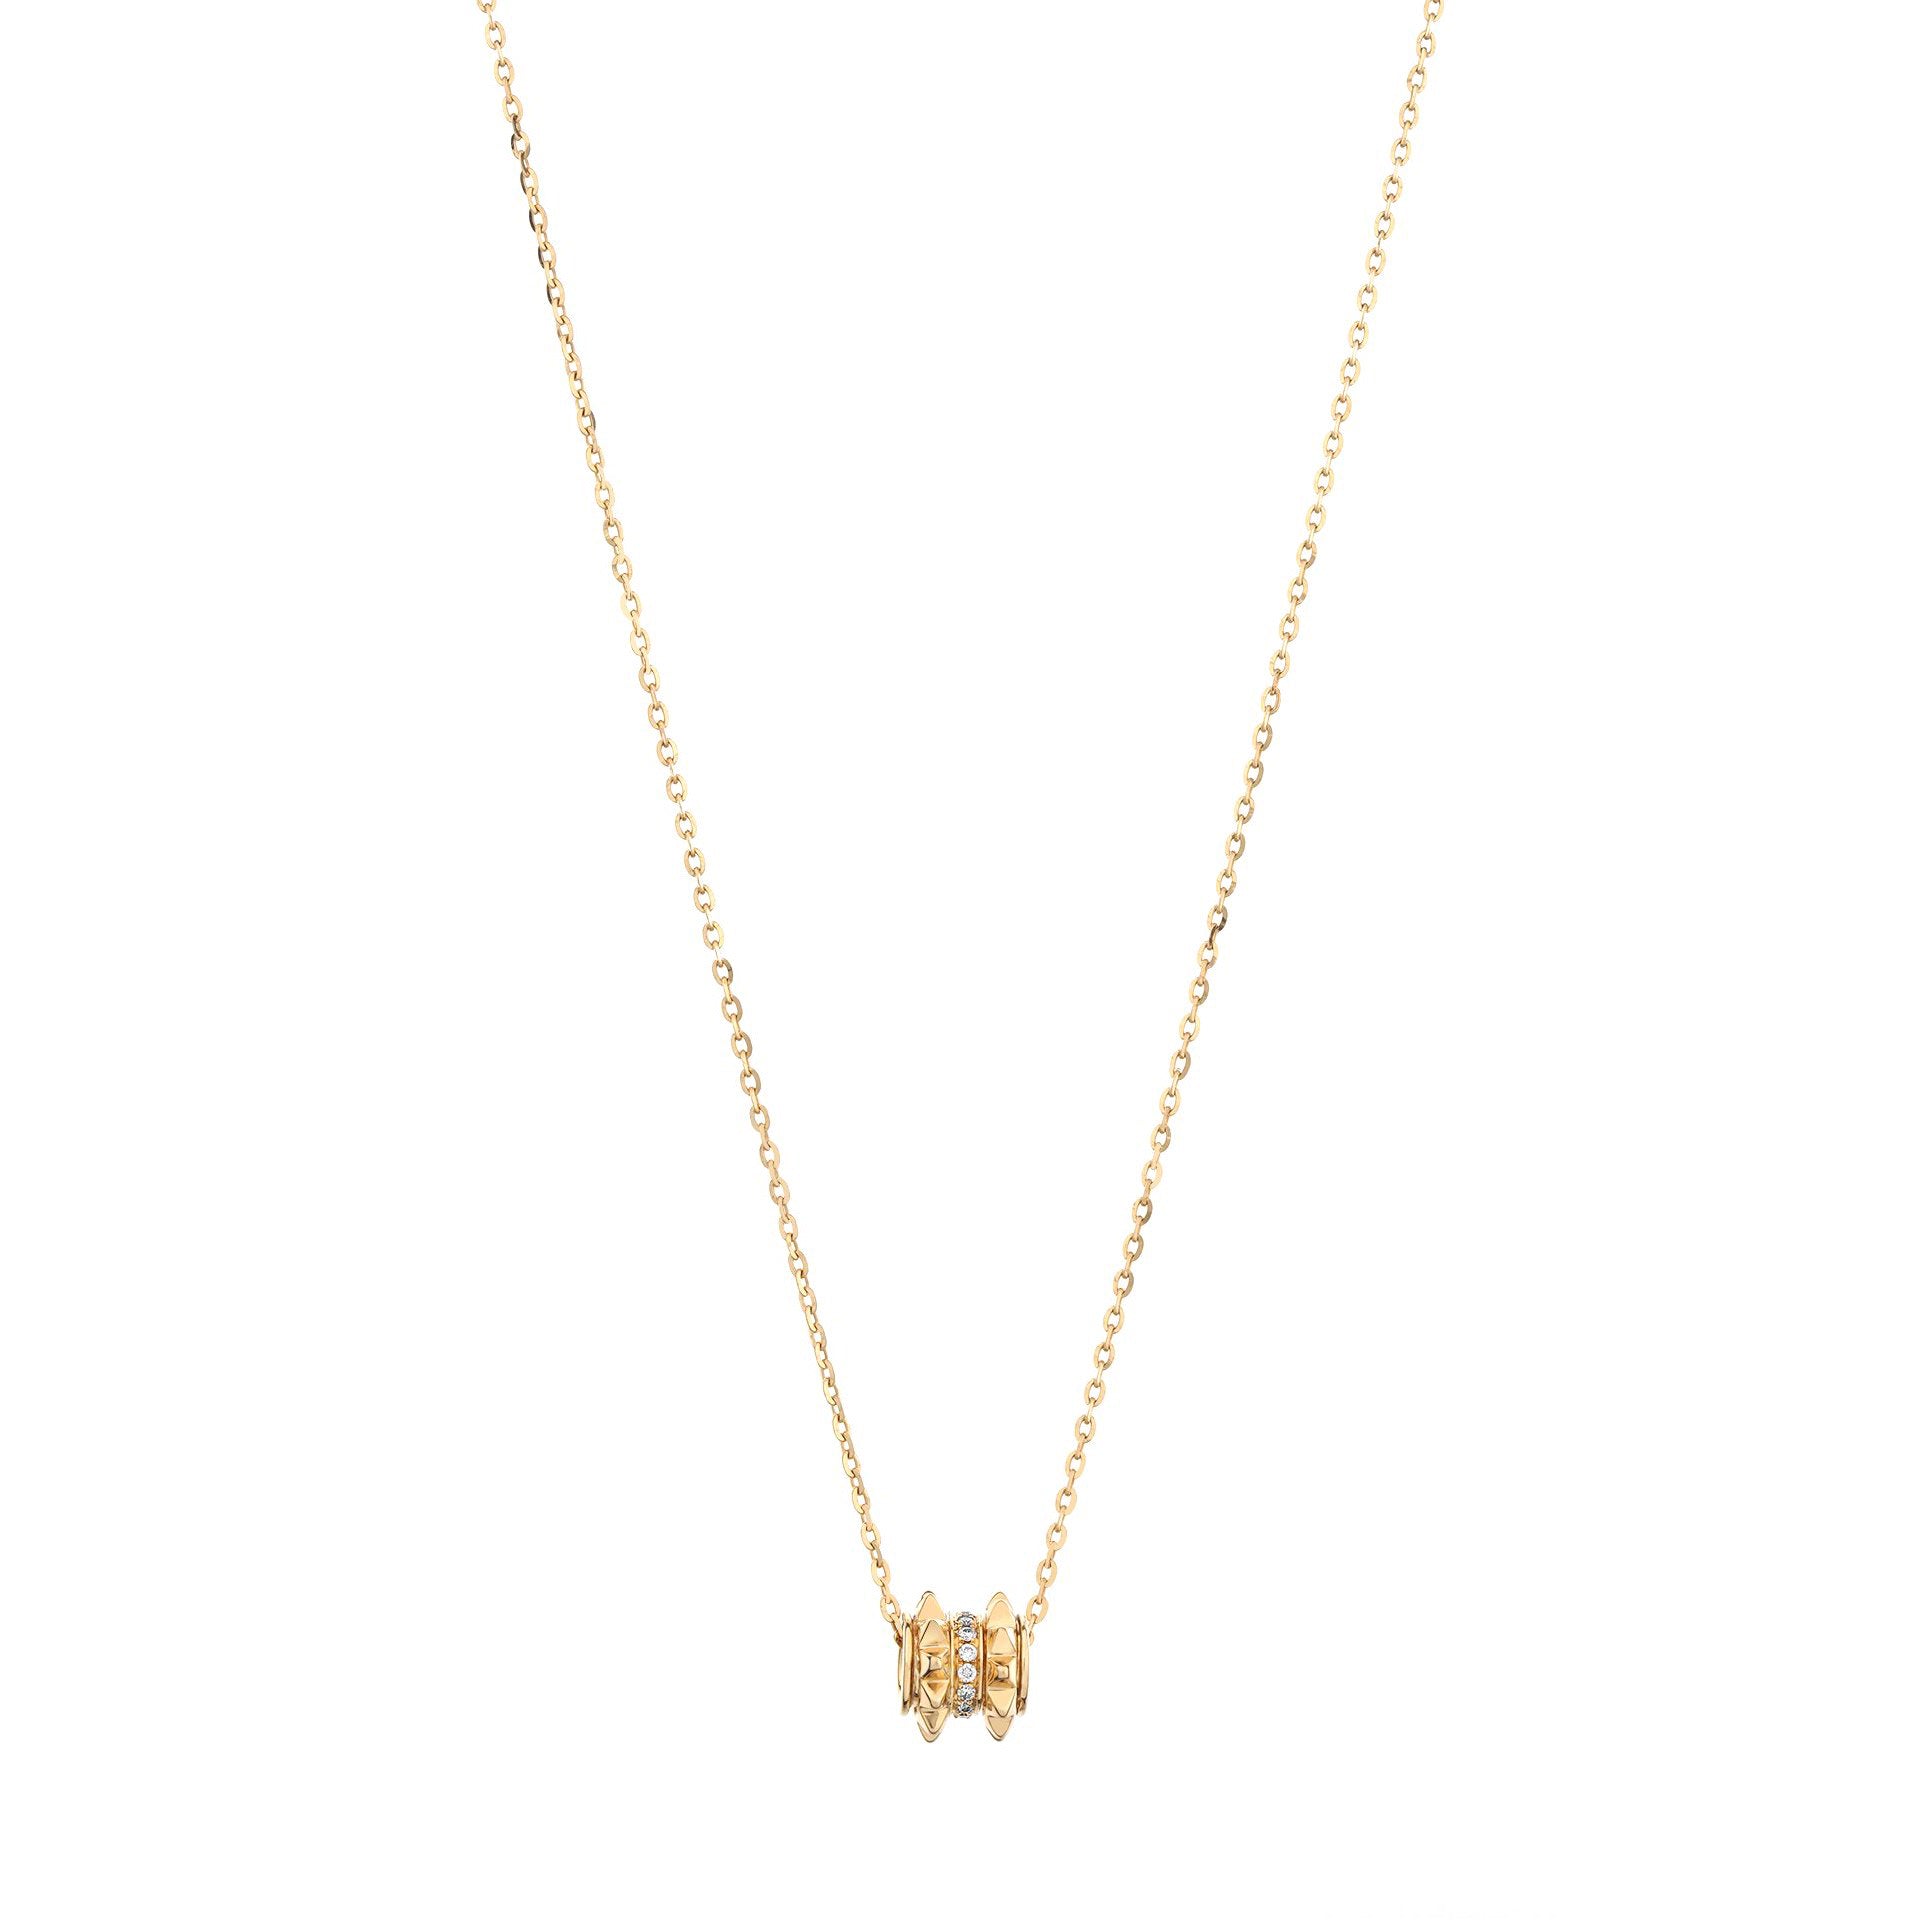 18k Hab El Hayl Evolution Necklace in Yellow Gold with Diamonds